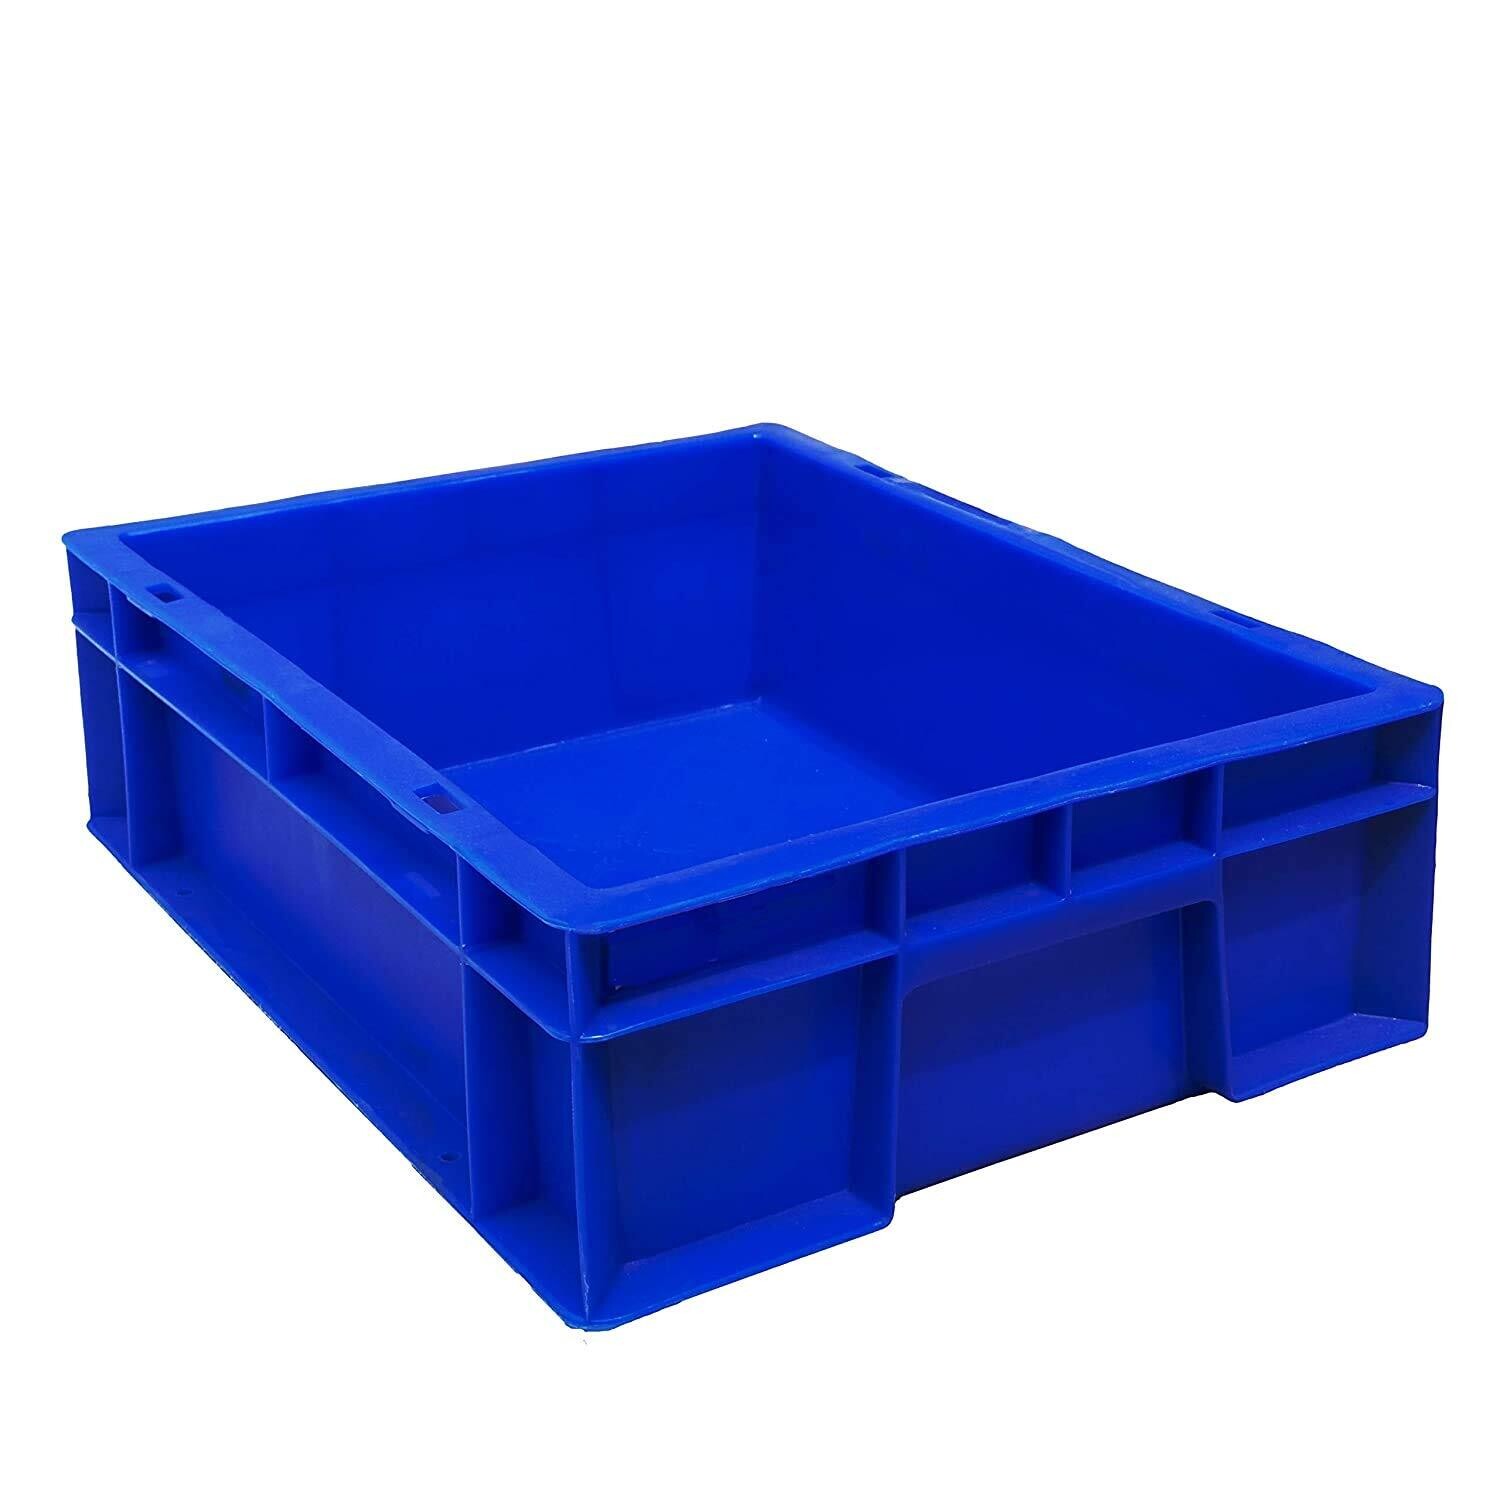 DOUGH TRAY BLUE BIG 12" LENGHT 16" BREATH 3.5" HEIGHT CAN BE USED FOR STORAGE OF ANY OTHER ITEMS TOO